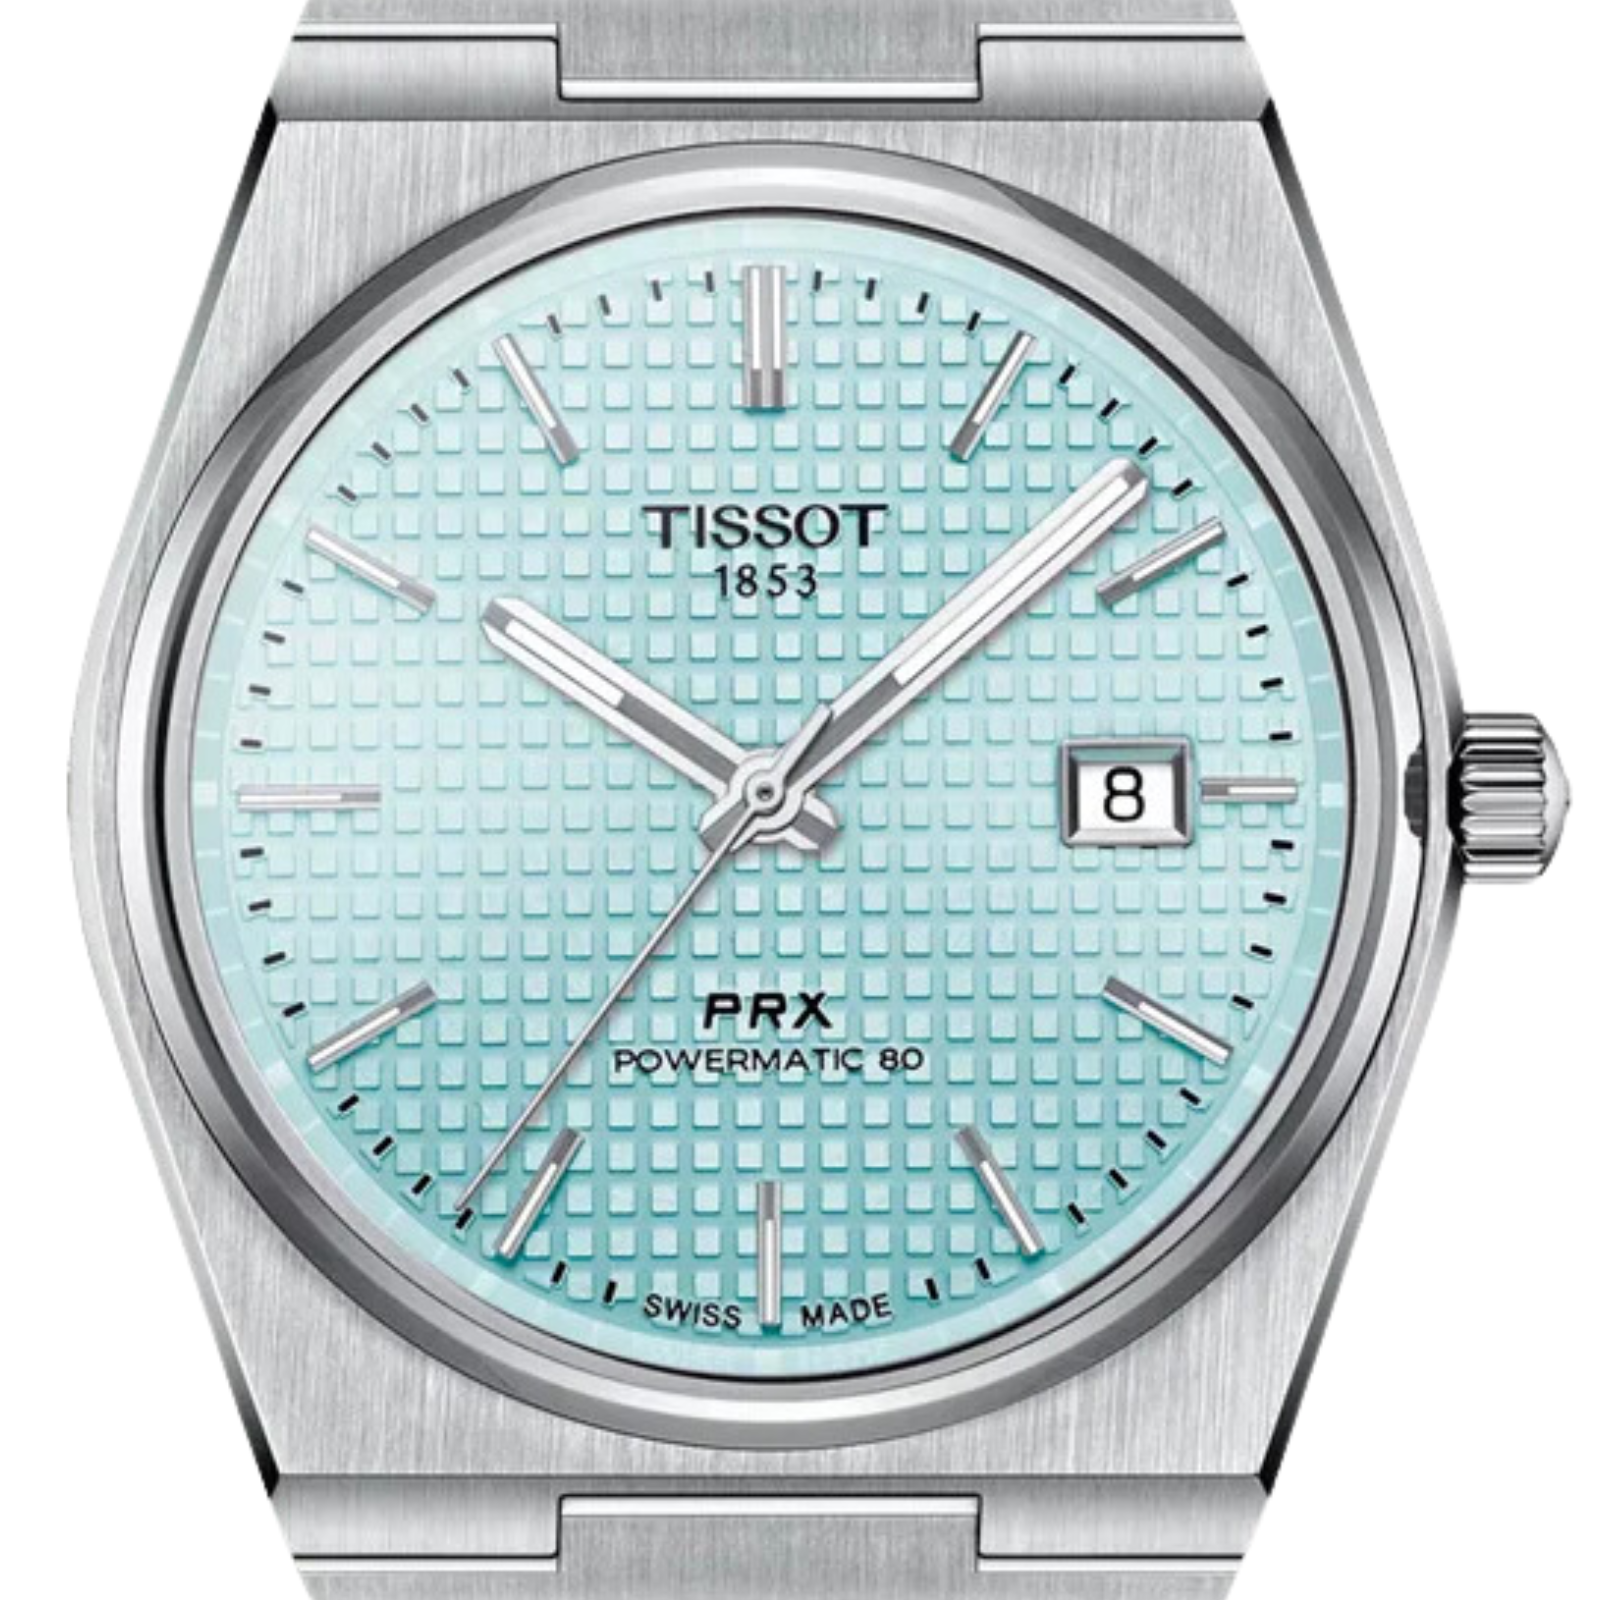 Tissot 1853 PRX Powermatic 80 T1374071135100 T137.407.11.351.00 Ice Blue Dial Dress Watch - Skywatches